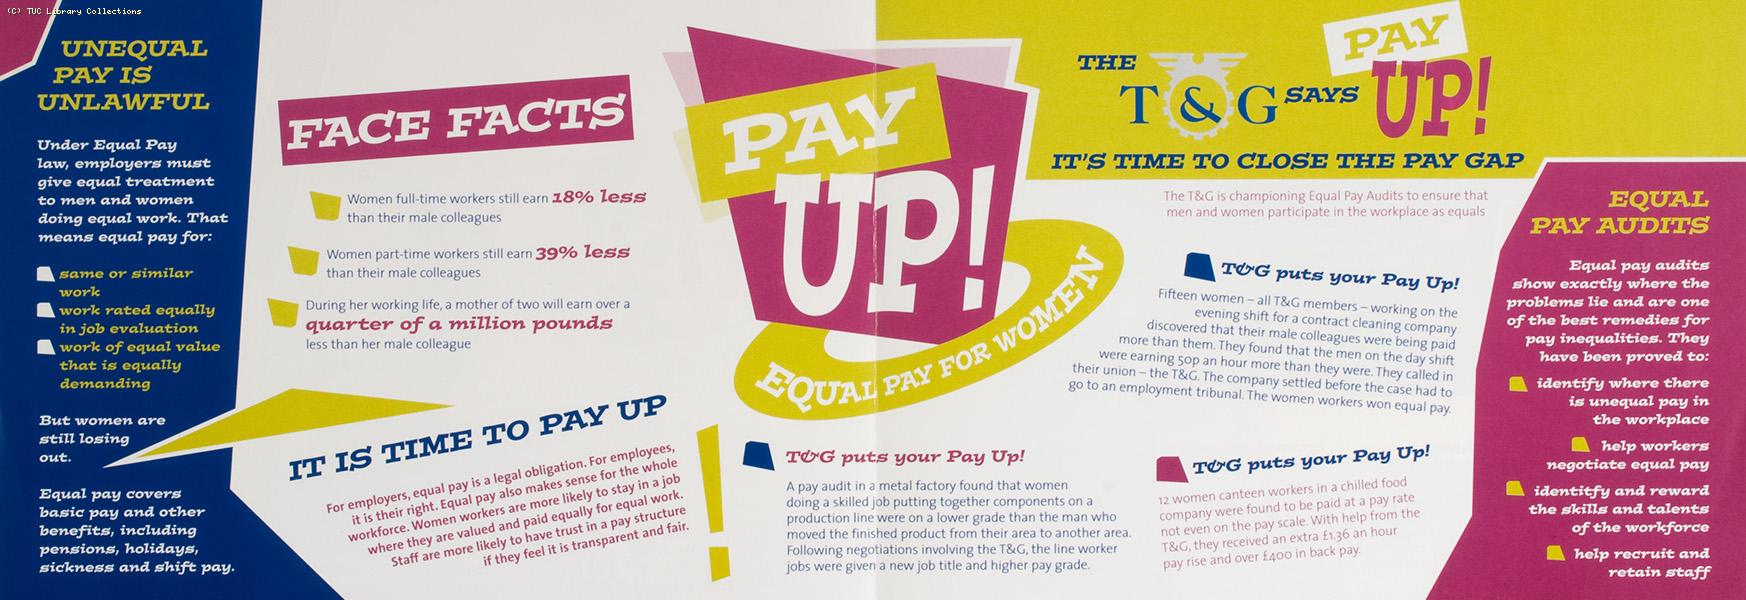 Pay up! Equal pay for women - TGWU leaflet, 2002